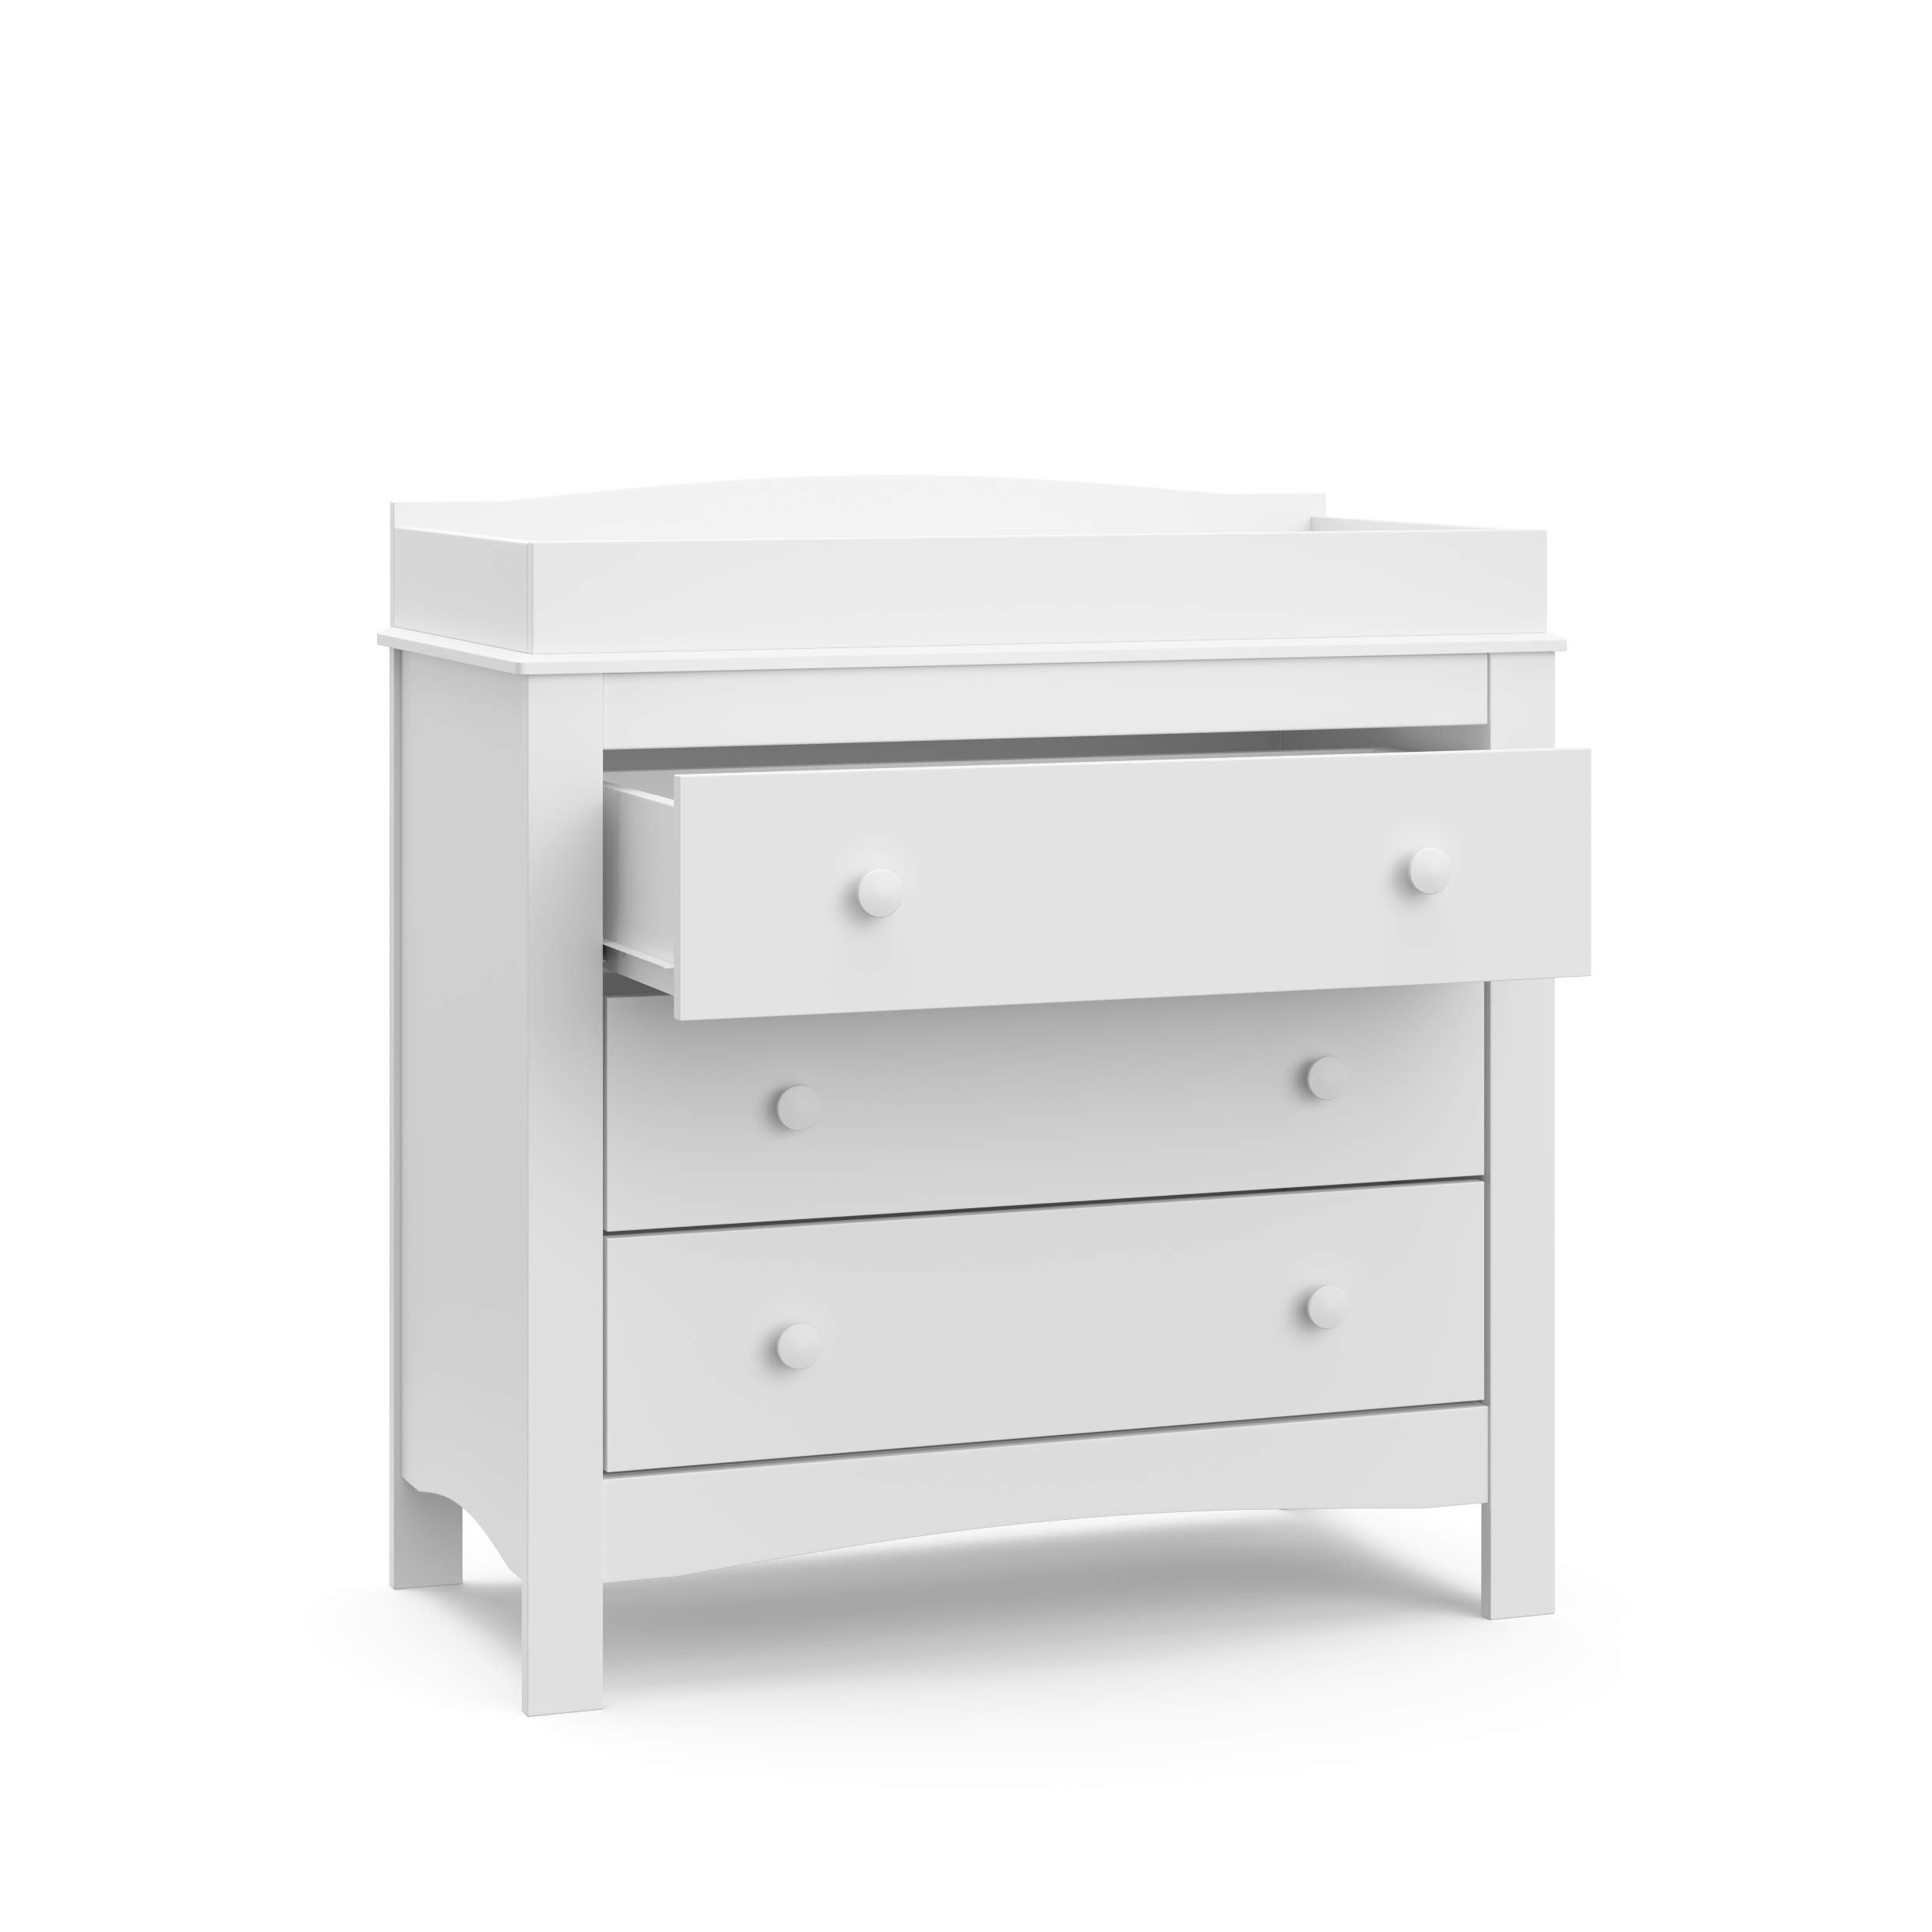 Graco Noah 3 Drawer Chest with Changing Topper (White) – GREENGUARD Gold Certified, Baby Dresser With Changing Table Top, Dresser for Nursery, 3 Drawer Kids Dresser